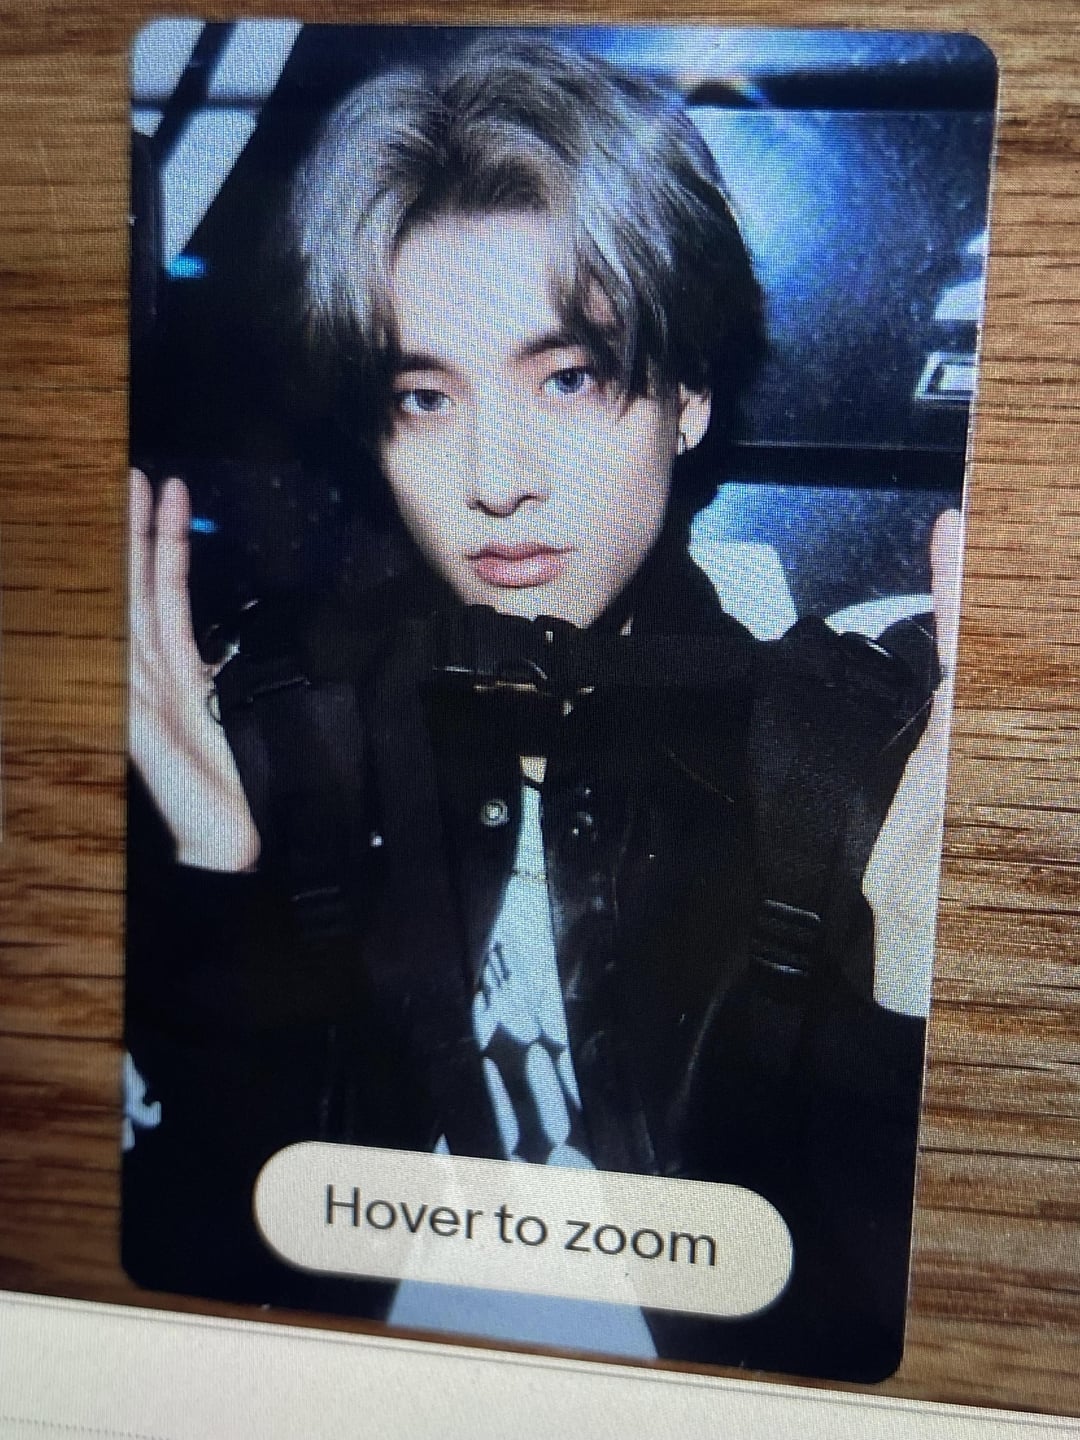 Where is this photocard from